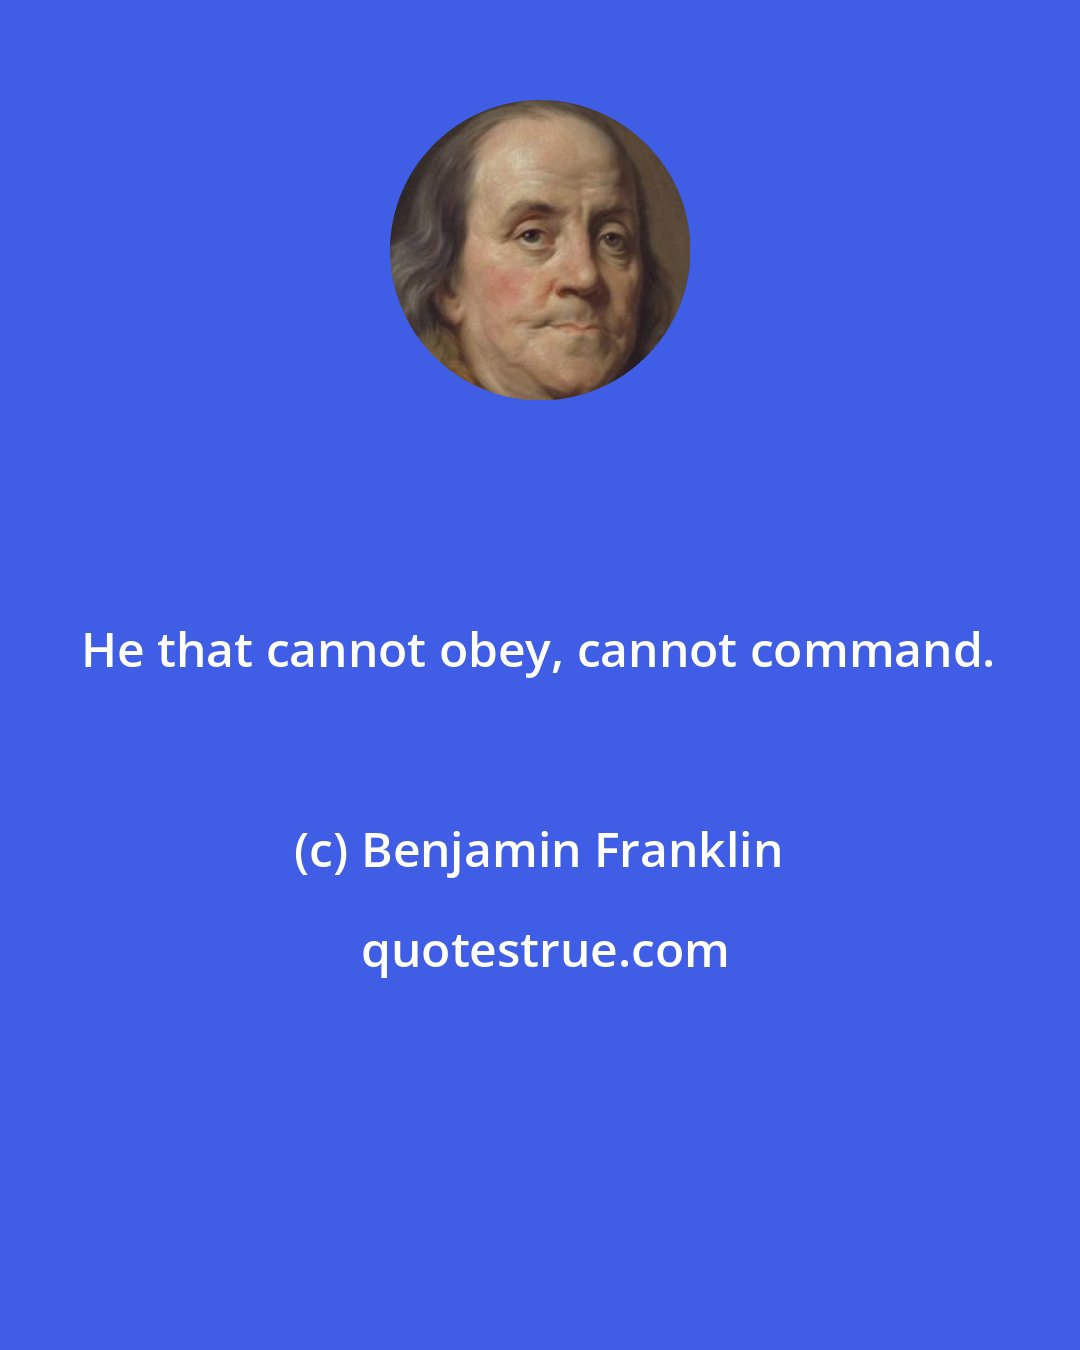 Benjamin Franklin: He that cannot obey, cannot command.